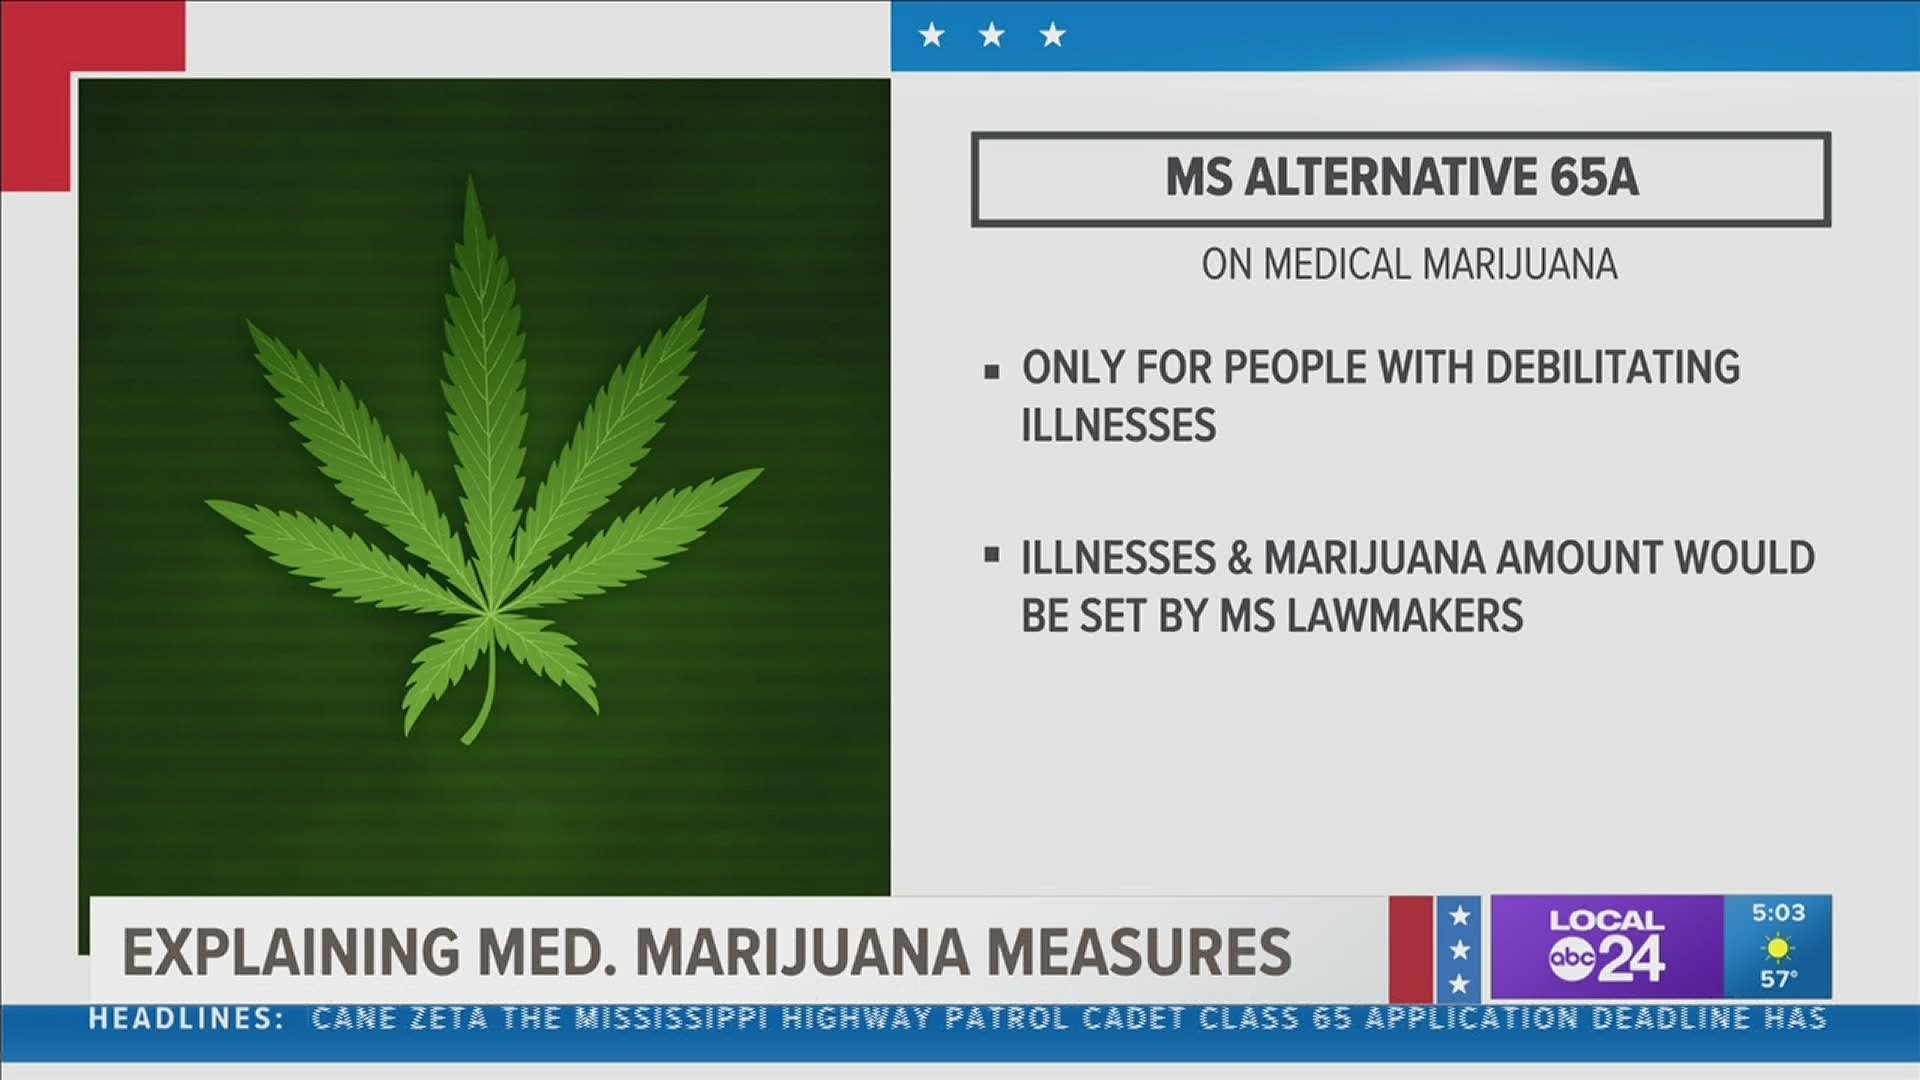 Initiative 65 would allow the prescription by a doctor of up to 5 ounces of marijuana per month for people with at least one of more than 20 medical conditions.